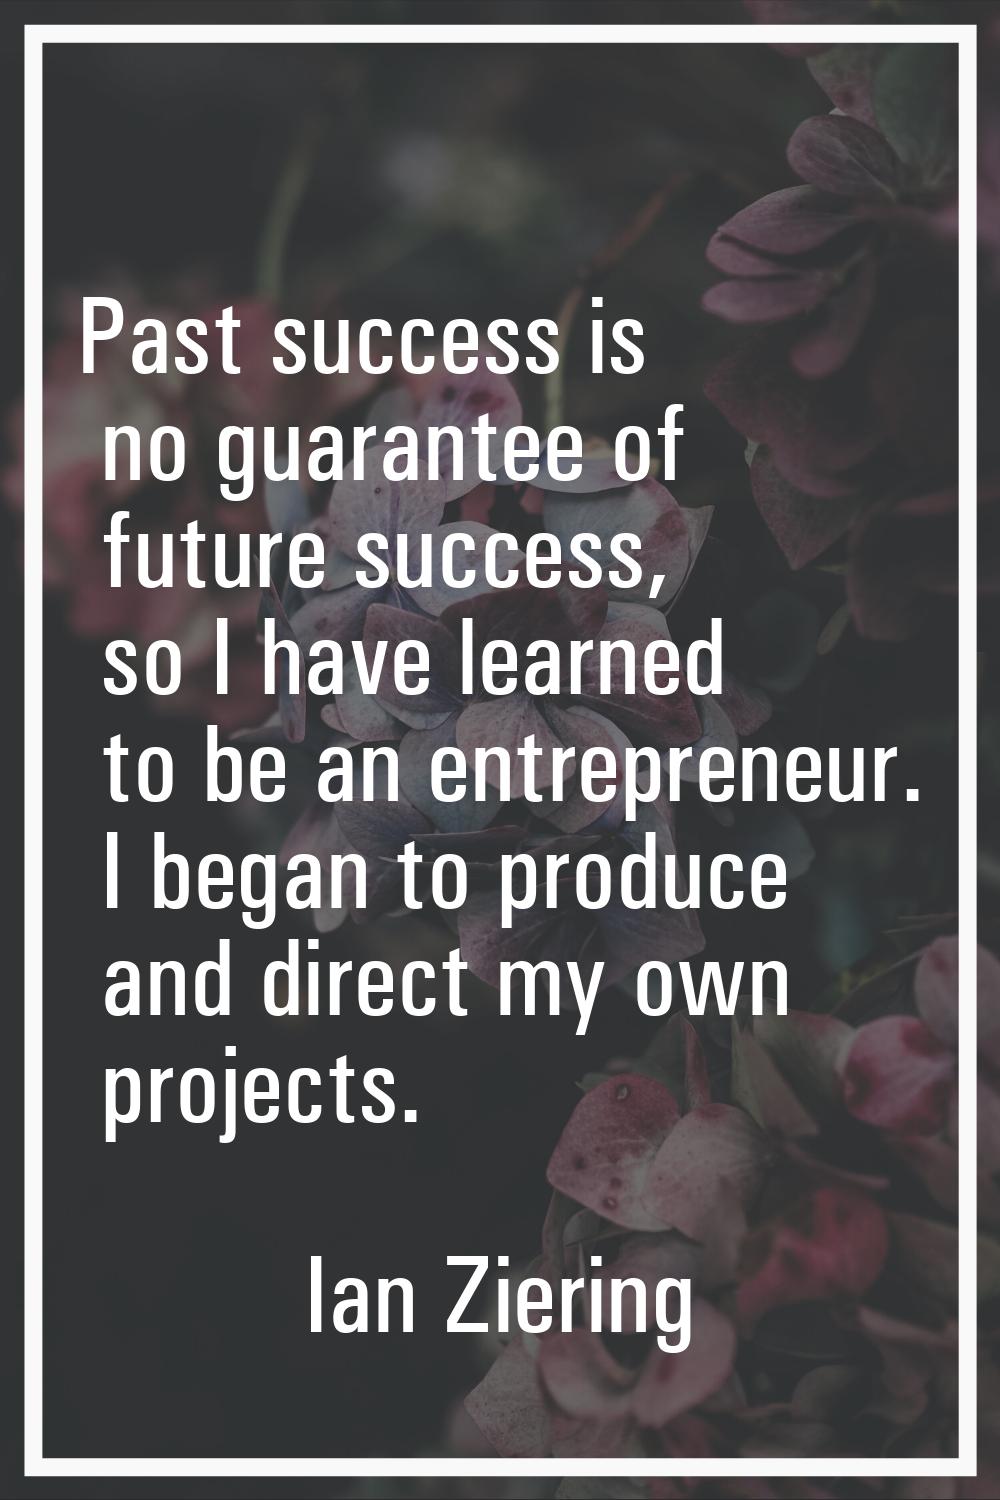 Past success is no guarantee of future success, so I have learned to be an entrepreneur. I began to